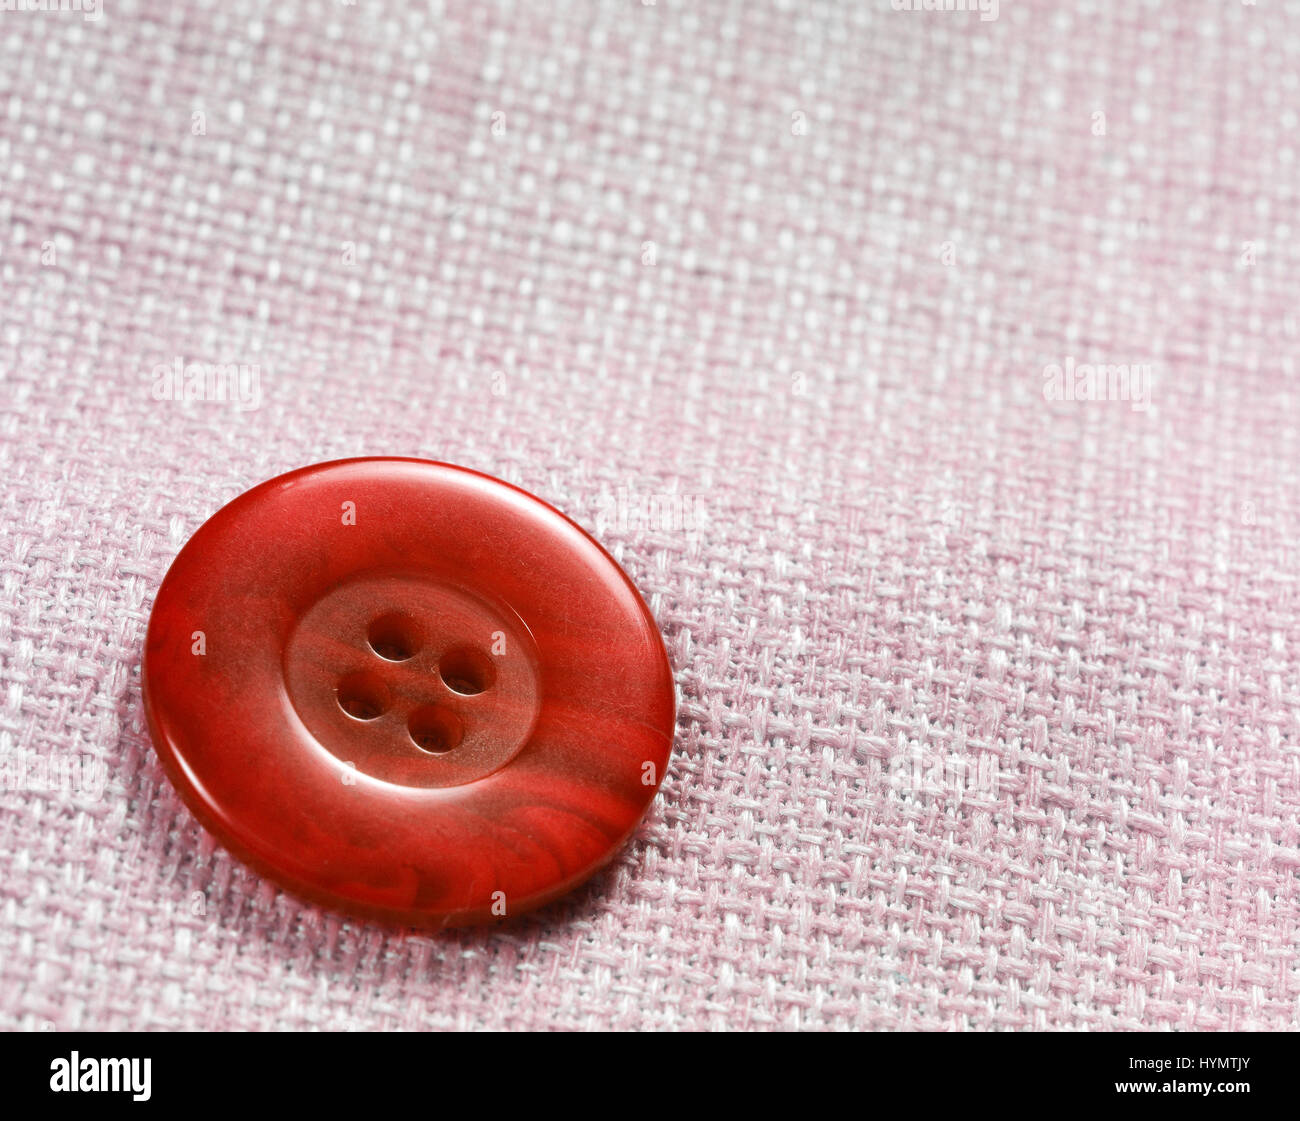 Single Red Button Stock Photo